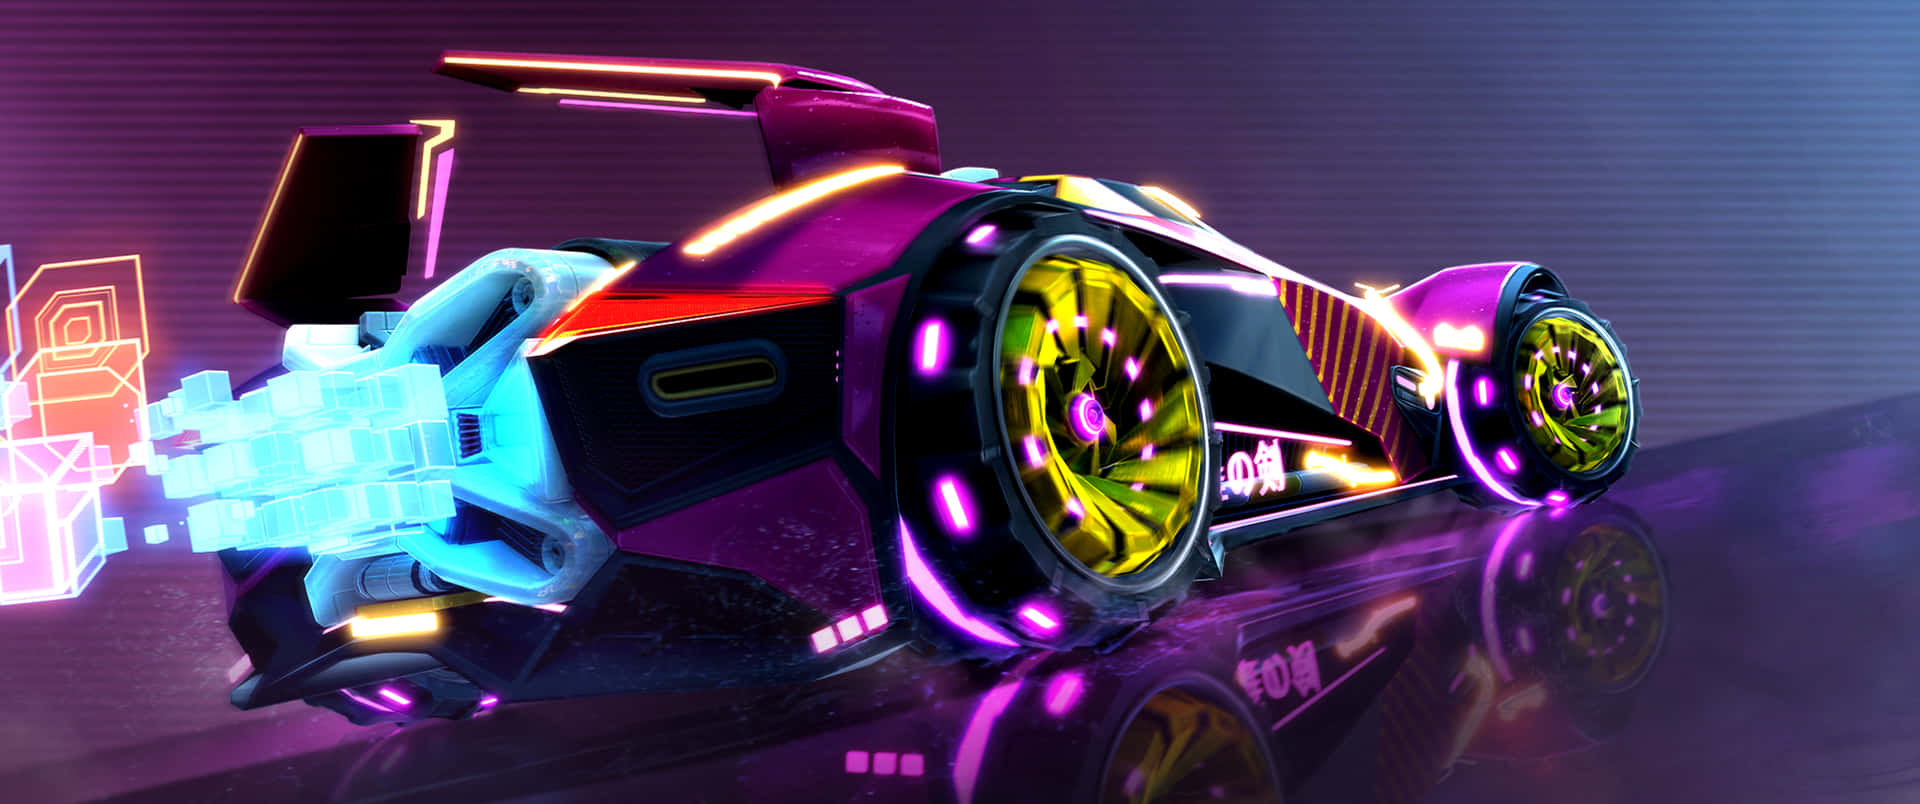 Drive to the finish line with this high definition 3440x1440p Rocket League background